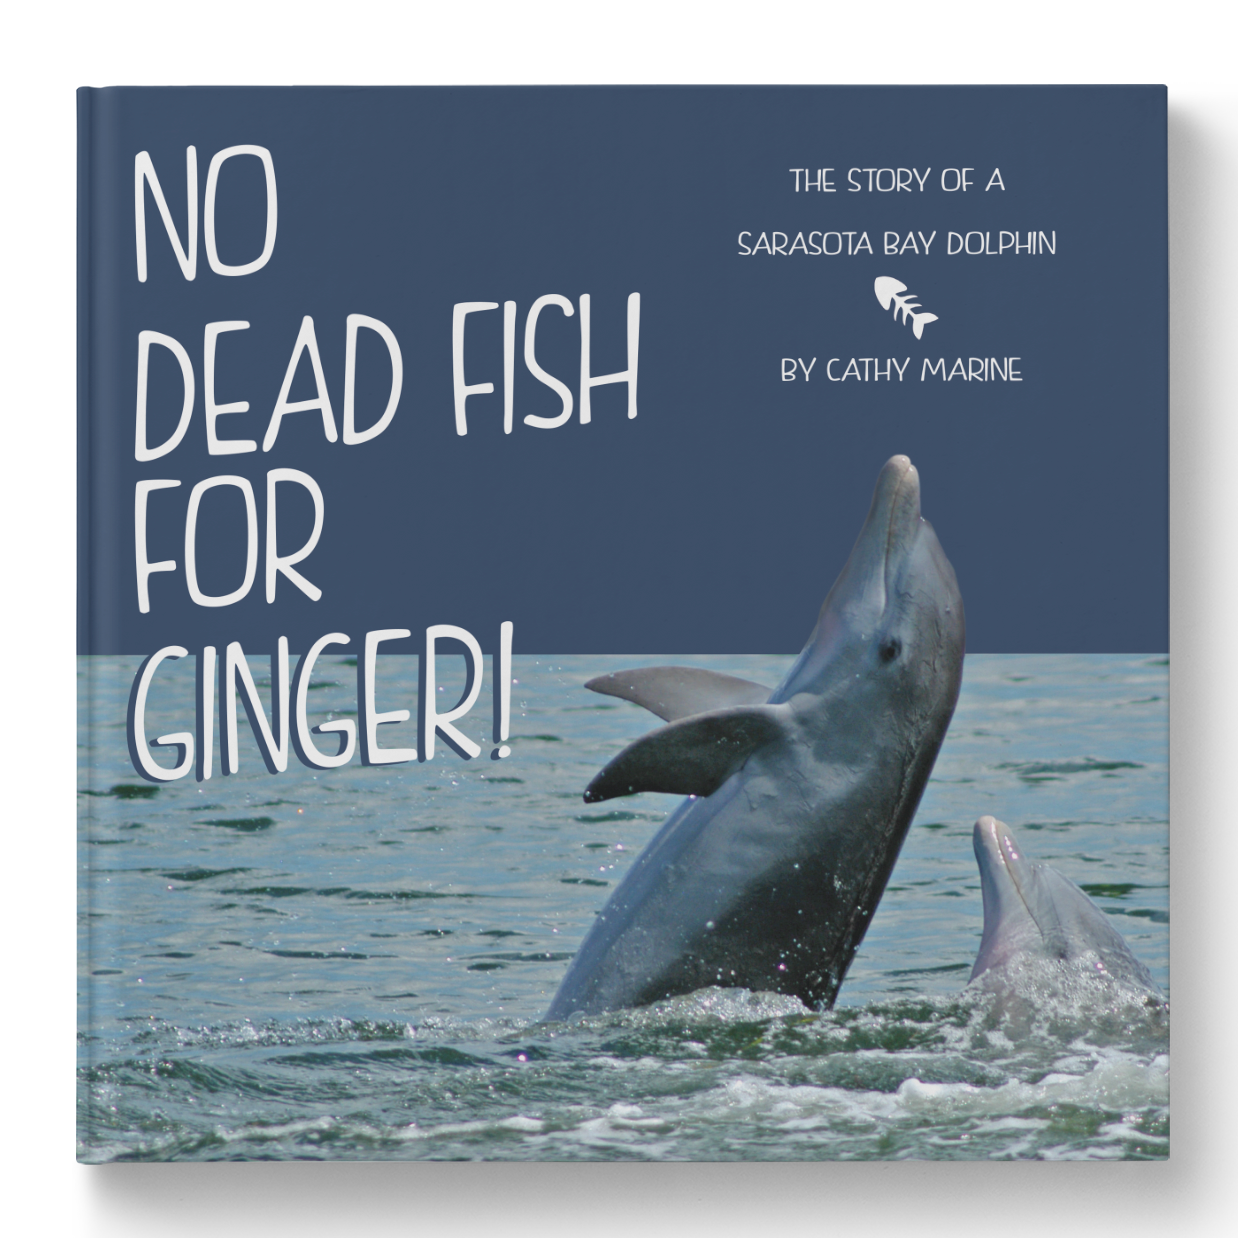 No Dead Fish for Ginger! The Story of a Sarasota Bay Dolphin